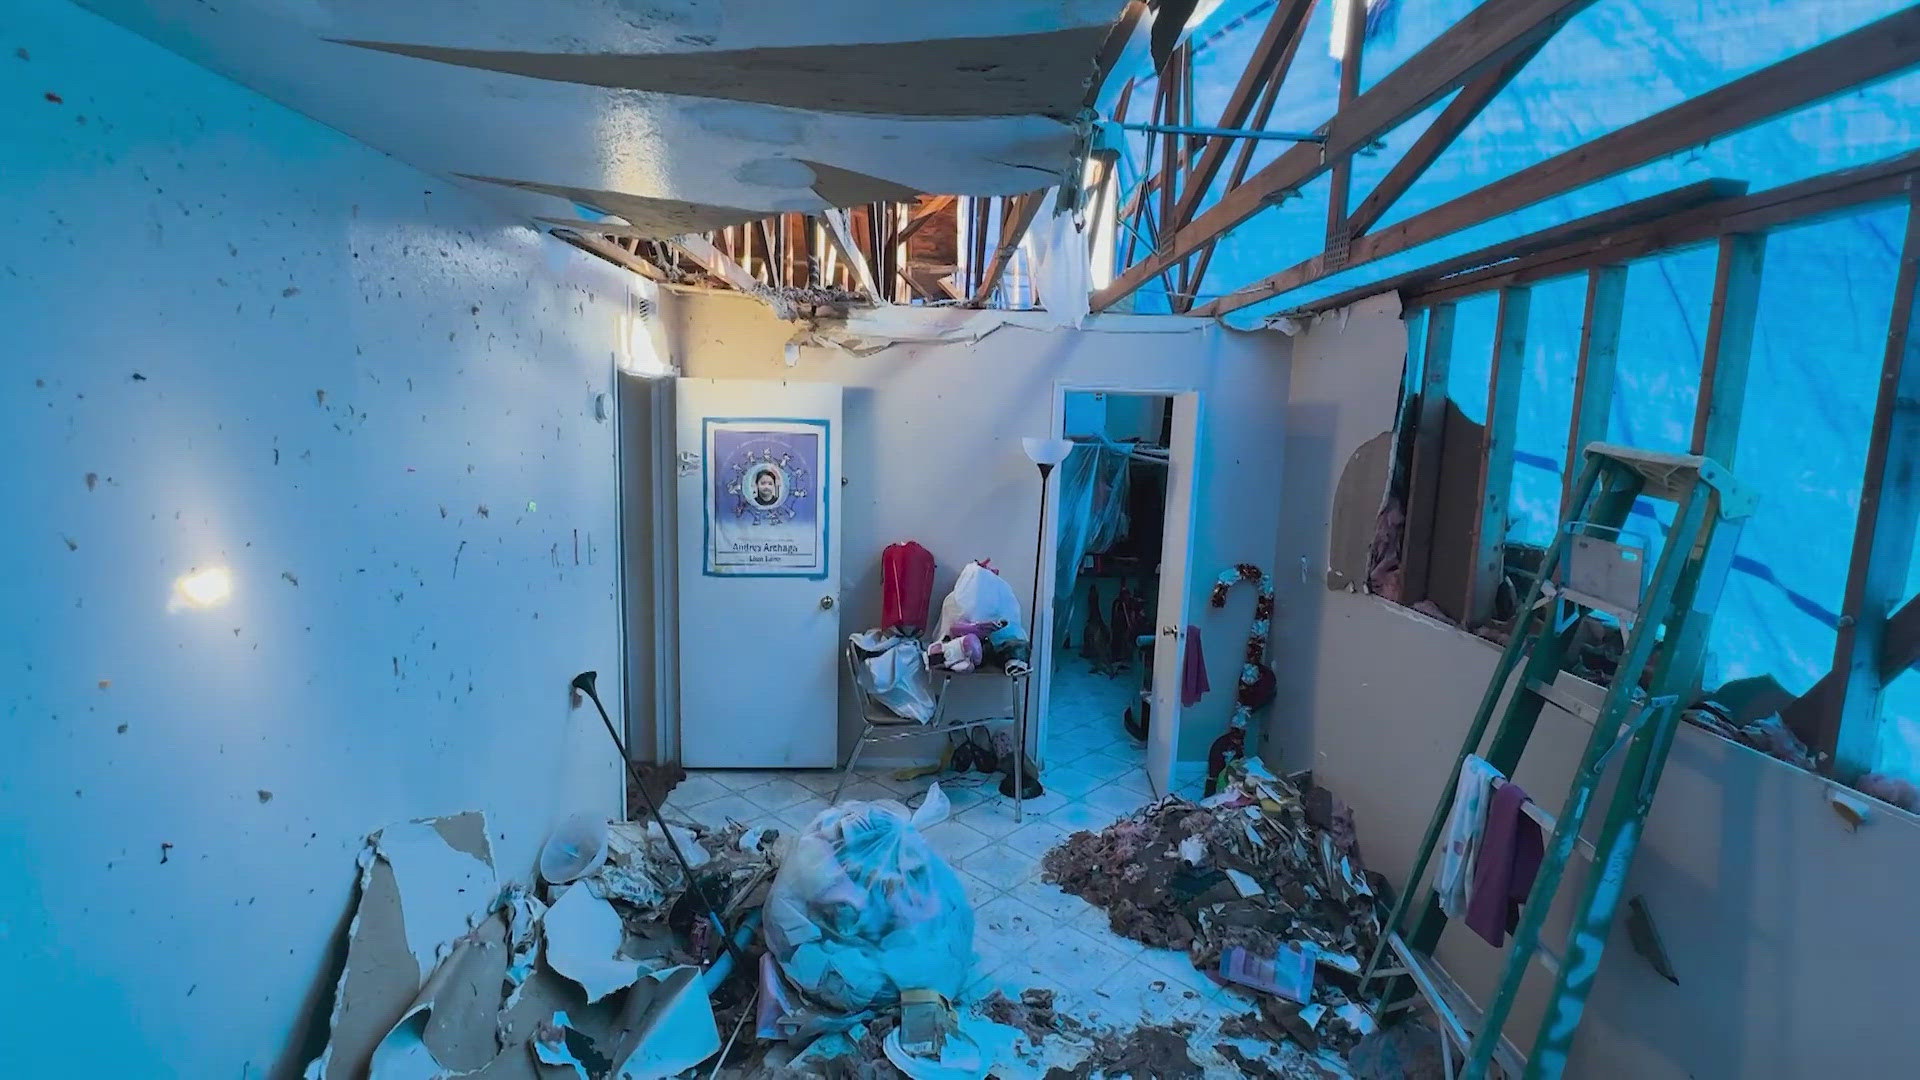 The derecho storm that hit the Houston area on May 16 ripped off the corner of the Archaga Family's Spring Branch apartment.